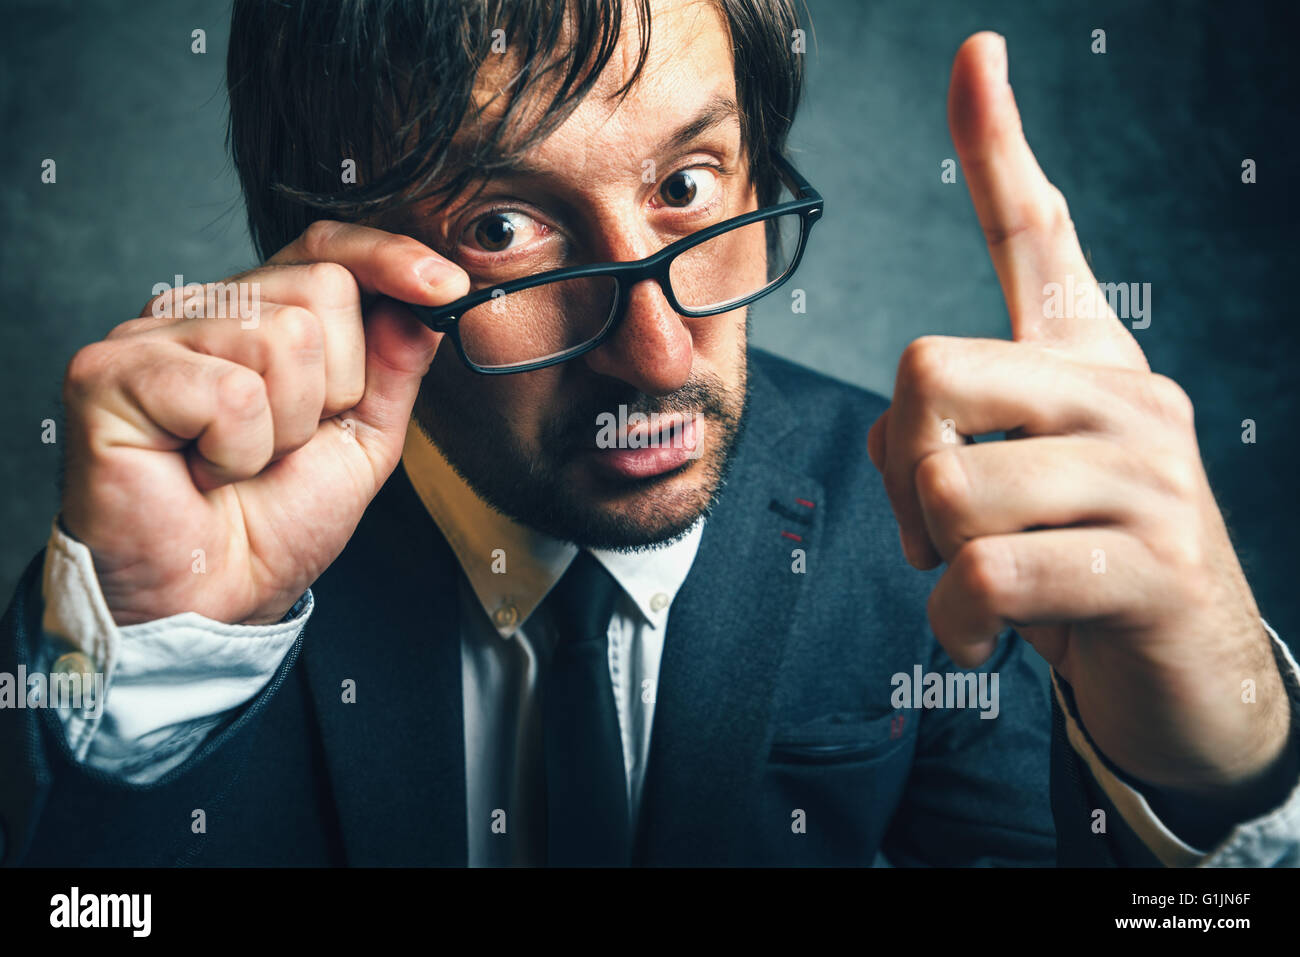 Angry tax inspector looking serious and determined, aggressive finger threatening adult businessperson with glasses Stock Photo